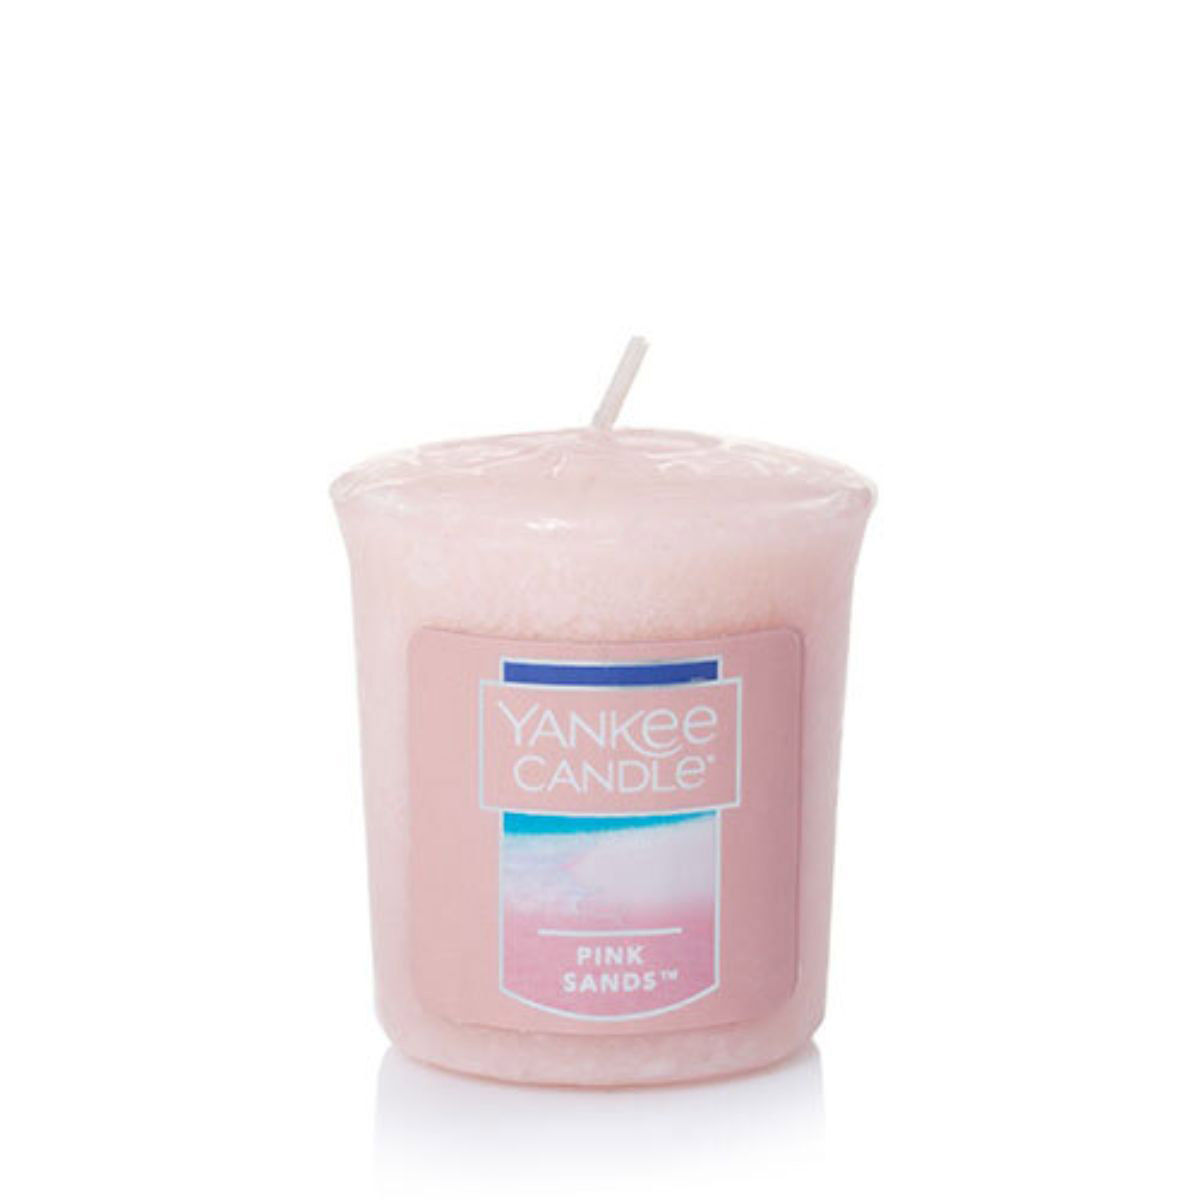 Buy Yankee Candle Votive Pink Sands Scented Candle Online